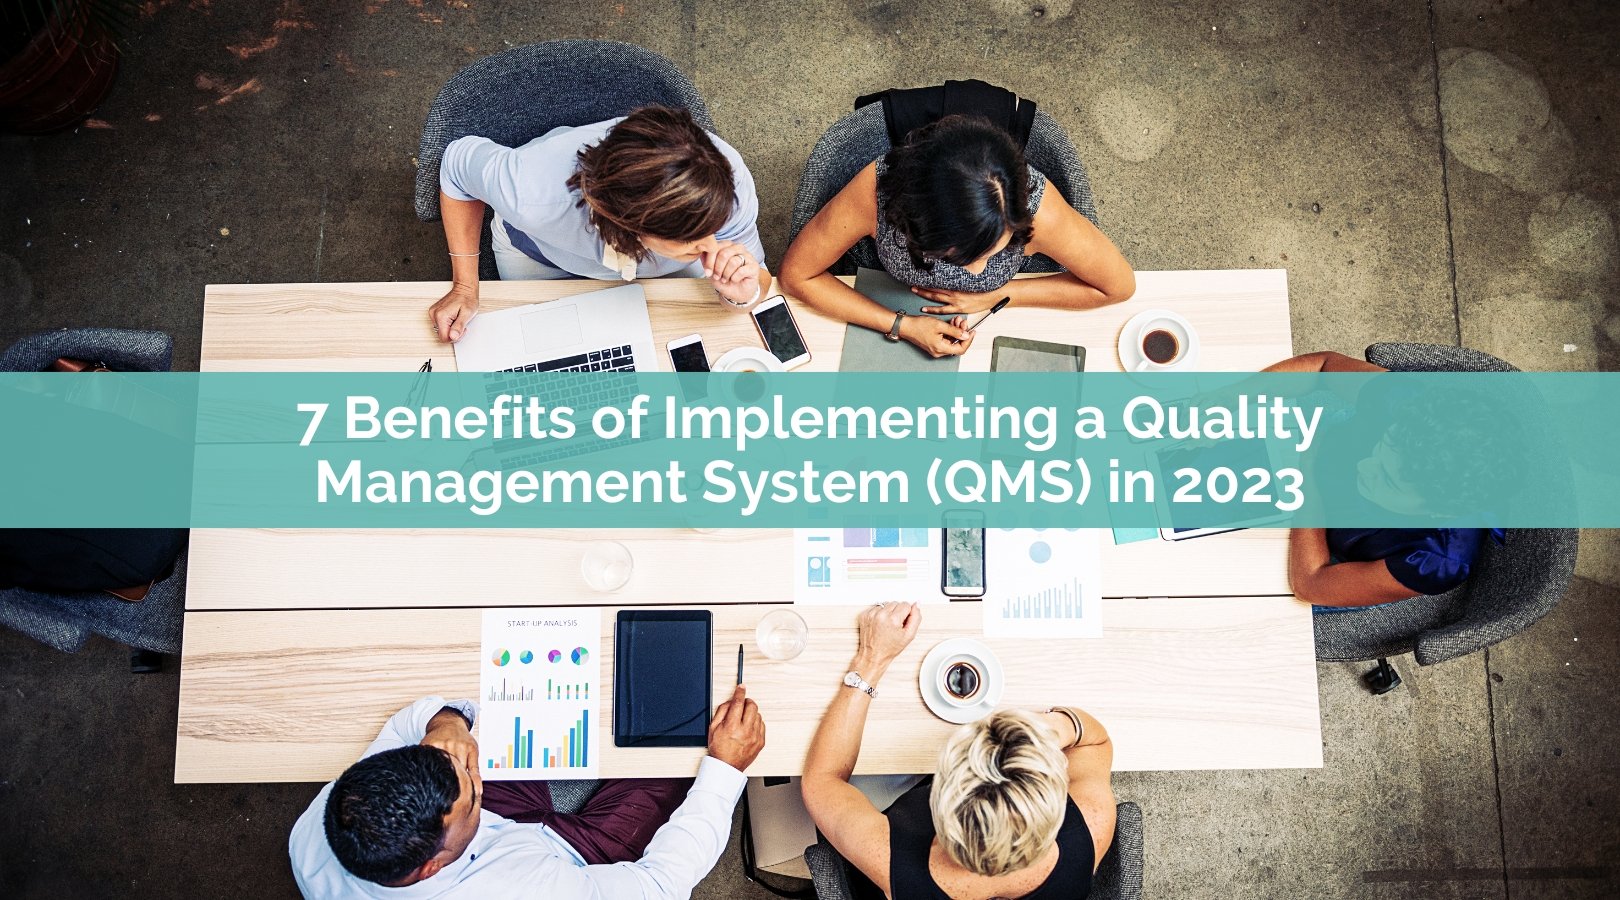 7 Benefits of Implementing a Quality Management System (QMS) in 2023